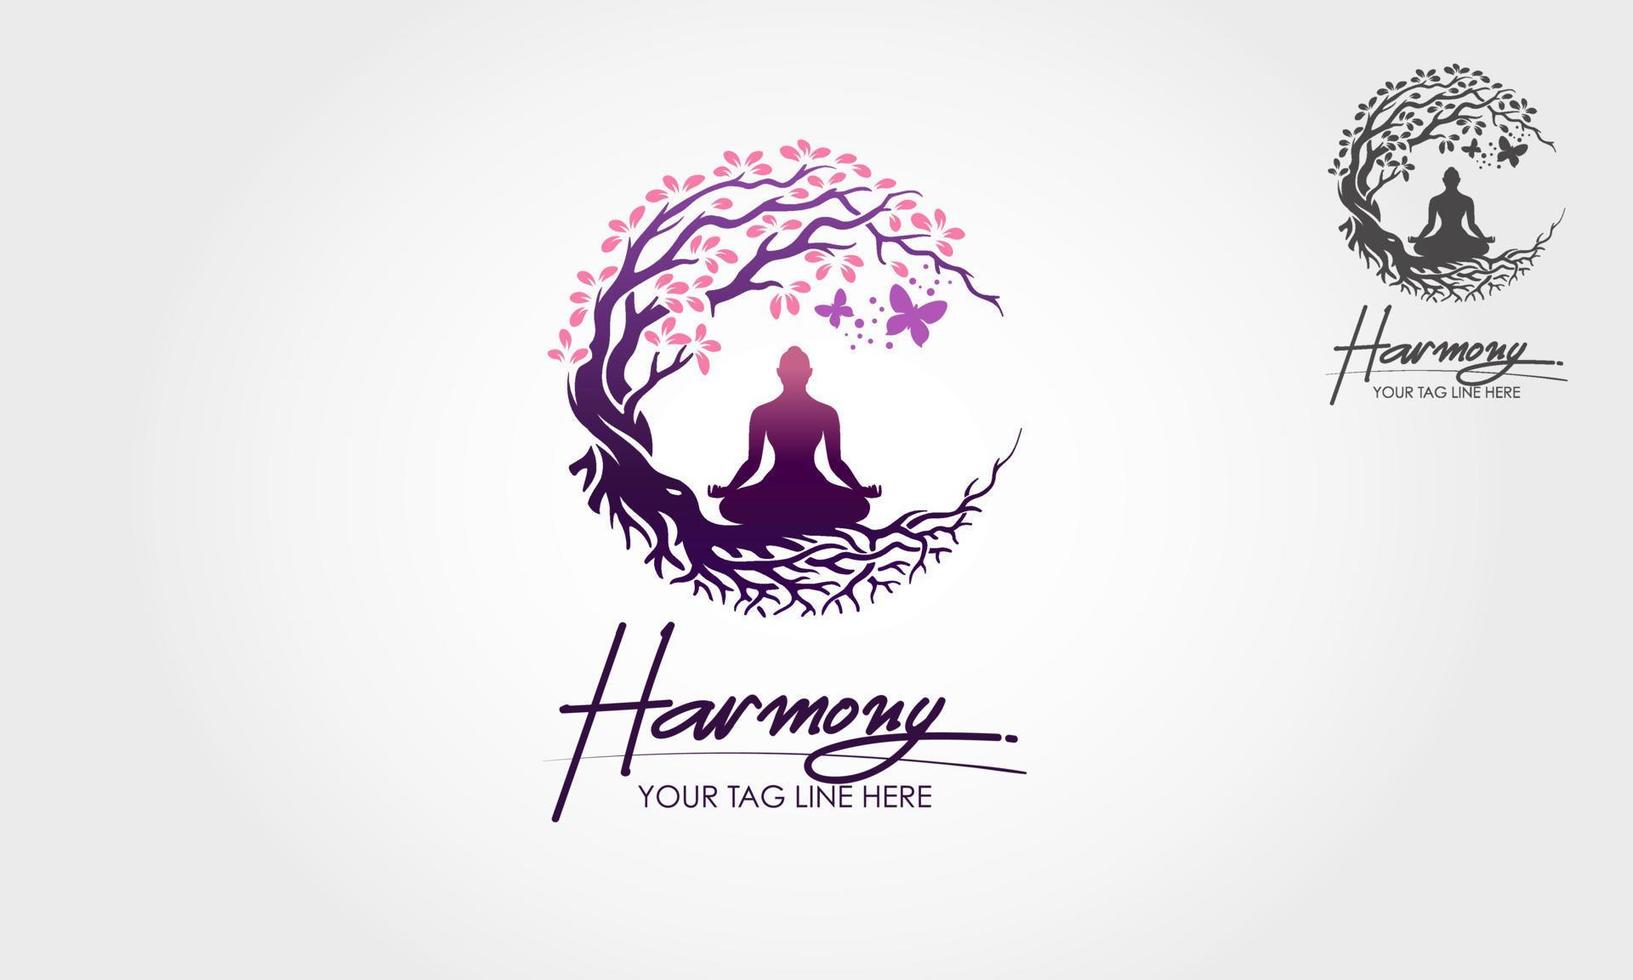 Harmony Vector Logo Template. Awesome Logo template that combine silhouette human, butterfly with purple leaves that means Healthy Life, perfect for health company, therapy, healing activist, etc.